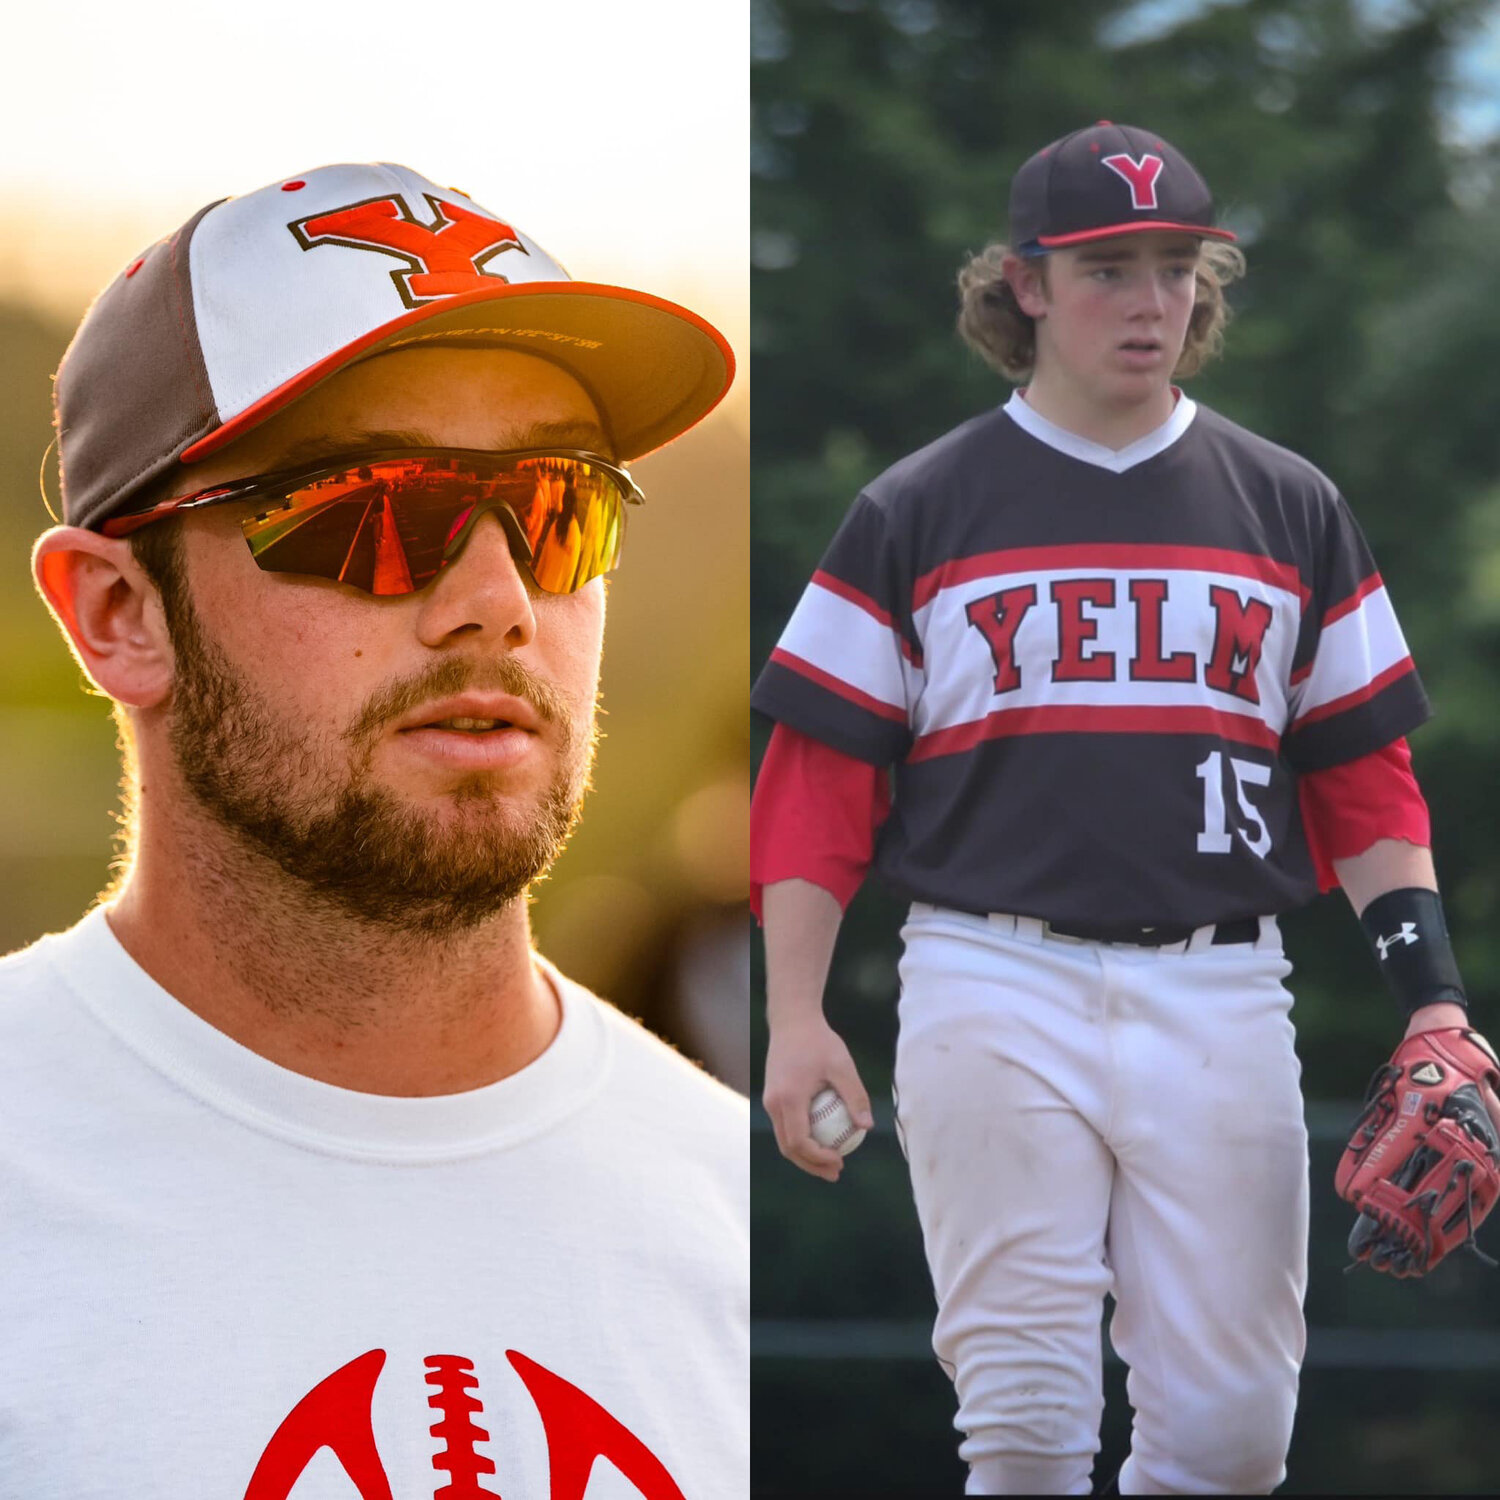 Yelm baseball's new head coach Dakota Hill was officially hired on Feb. 1. He played baseball for four seasons at Yelm prior to graduating in 2017.